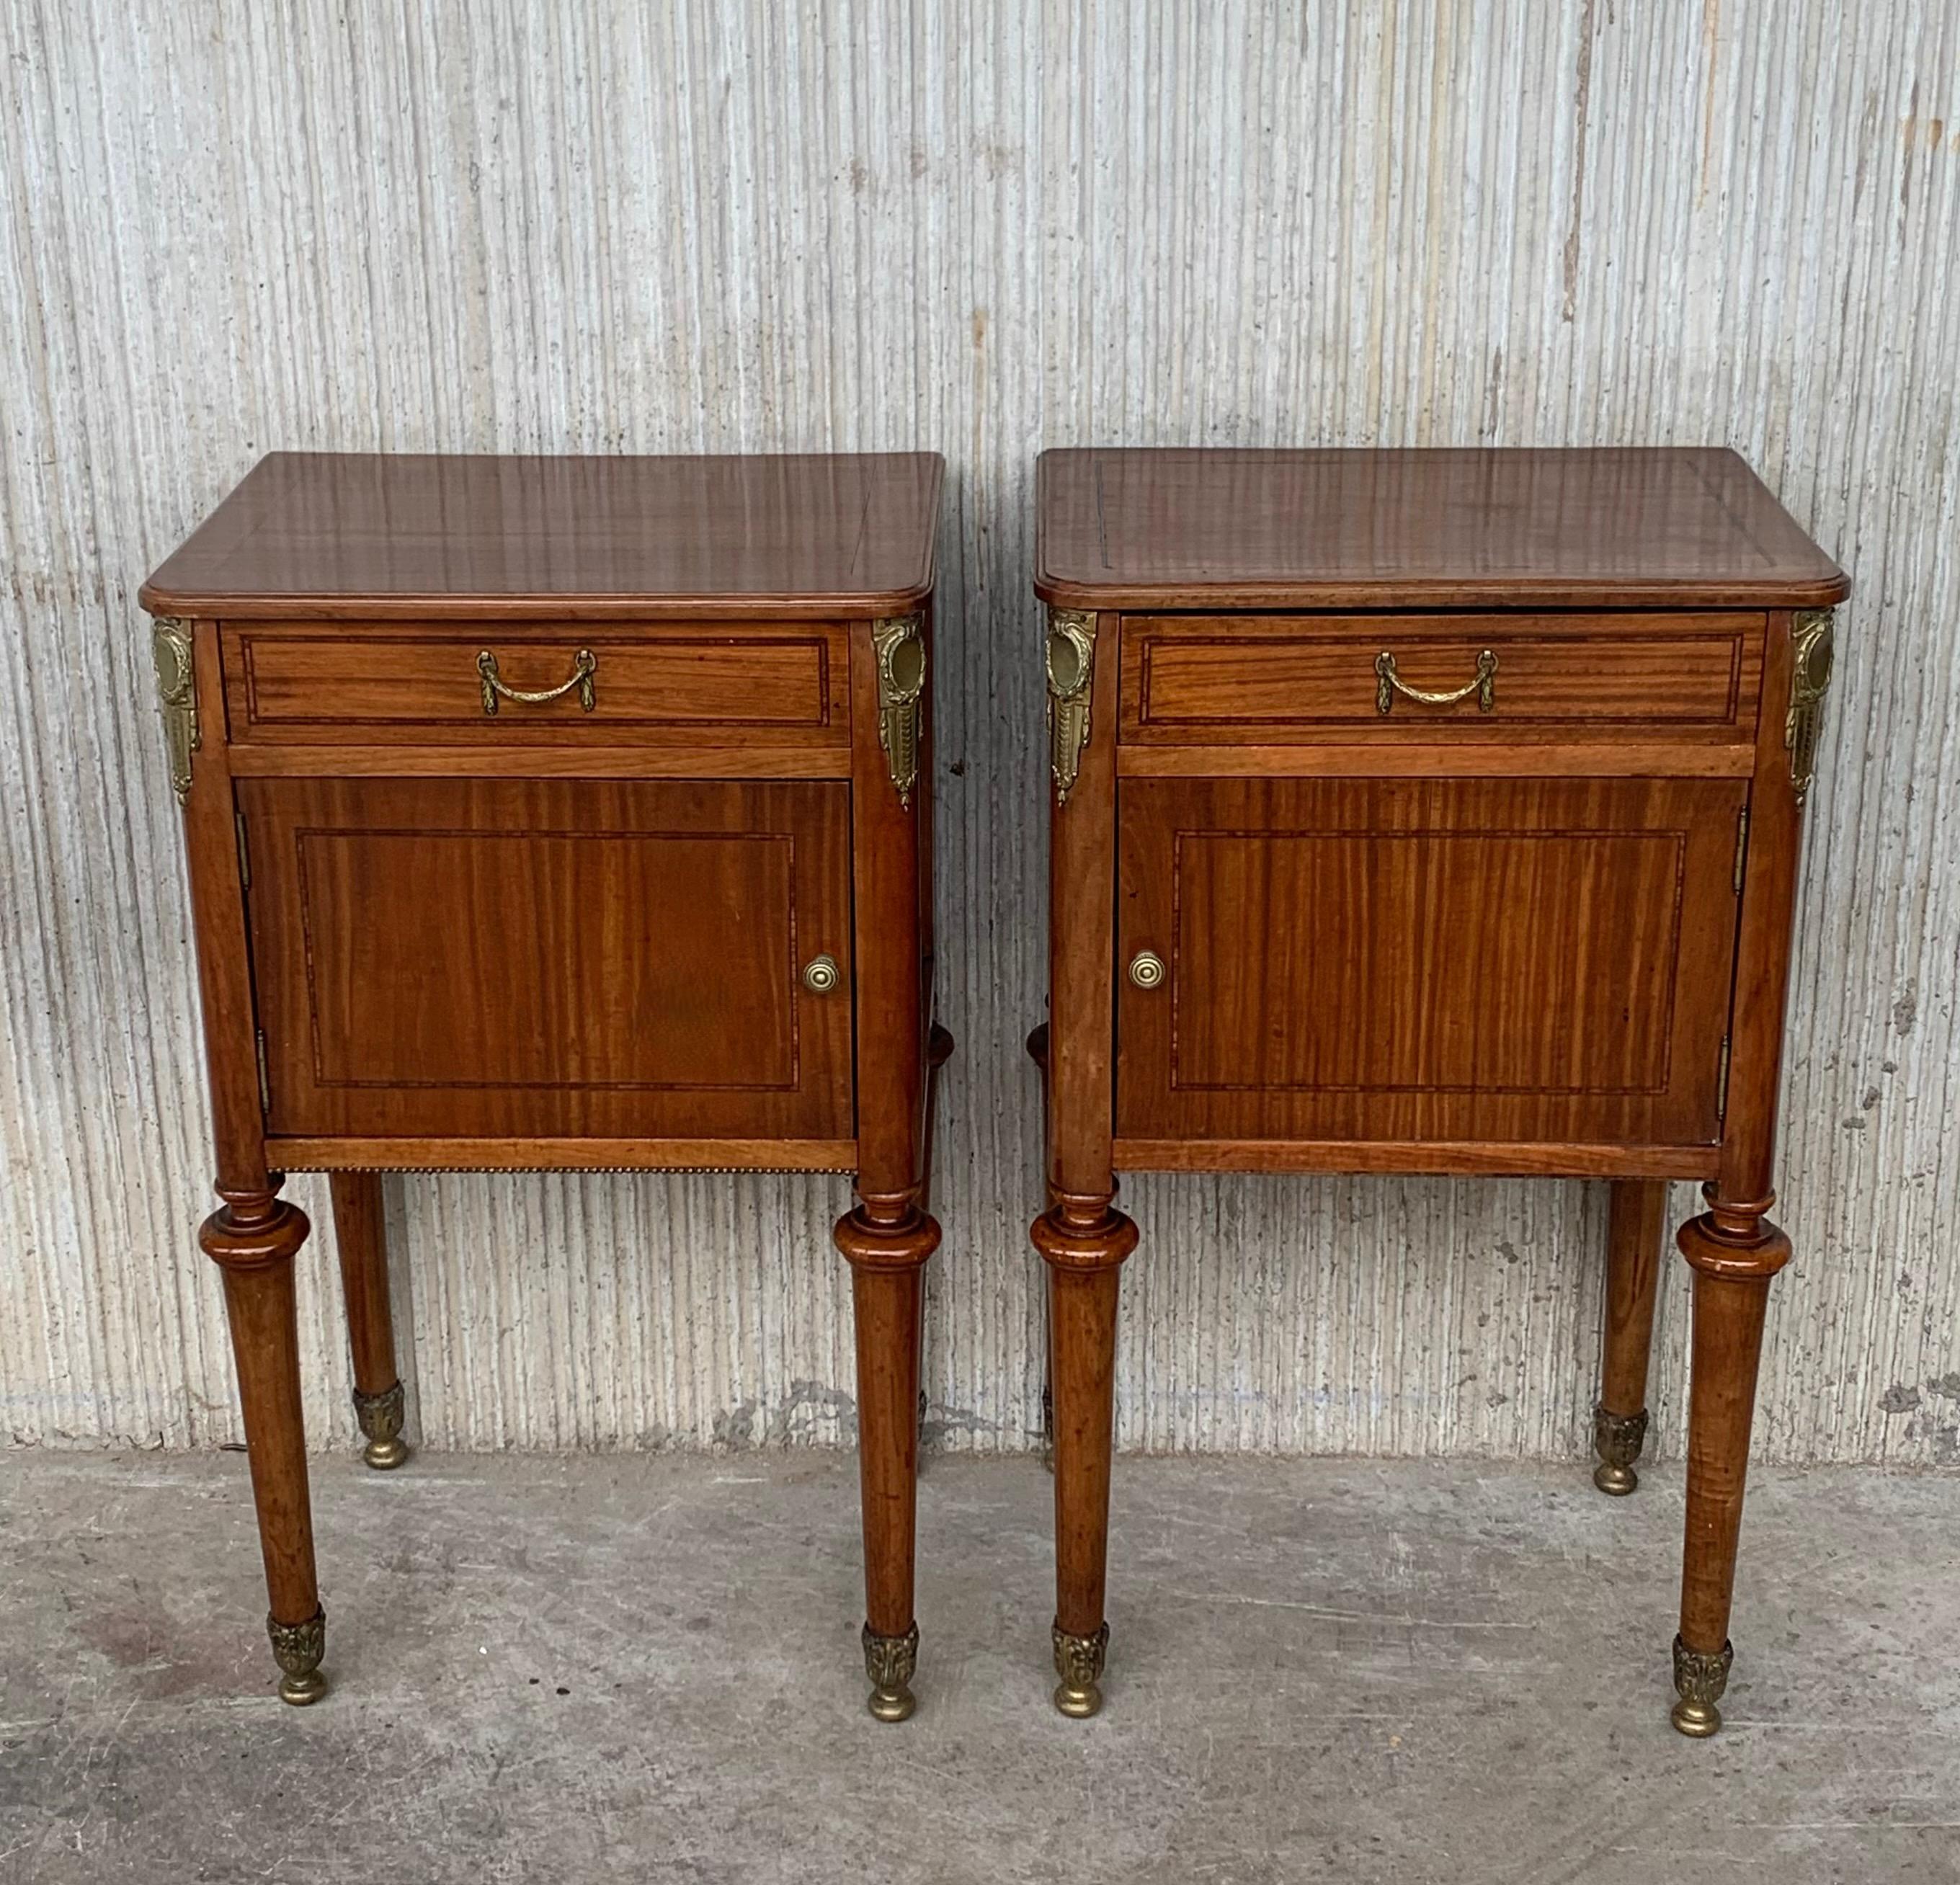 This is a French antique bedside cabinet dating to the late 19th century, circa 1890. Appealing biscuit tones to the light walnut finish Attractive grain in the quartered veneered decoration. Raised on round, tapering walnut legs, pinched beneath